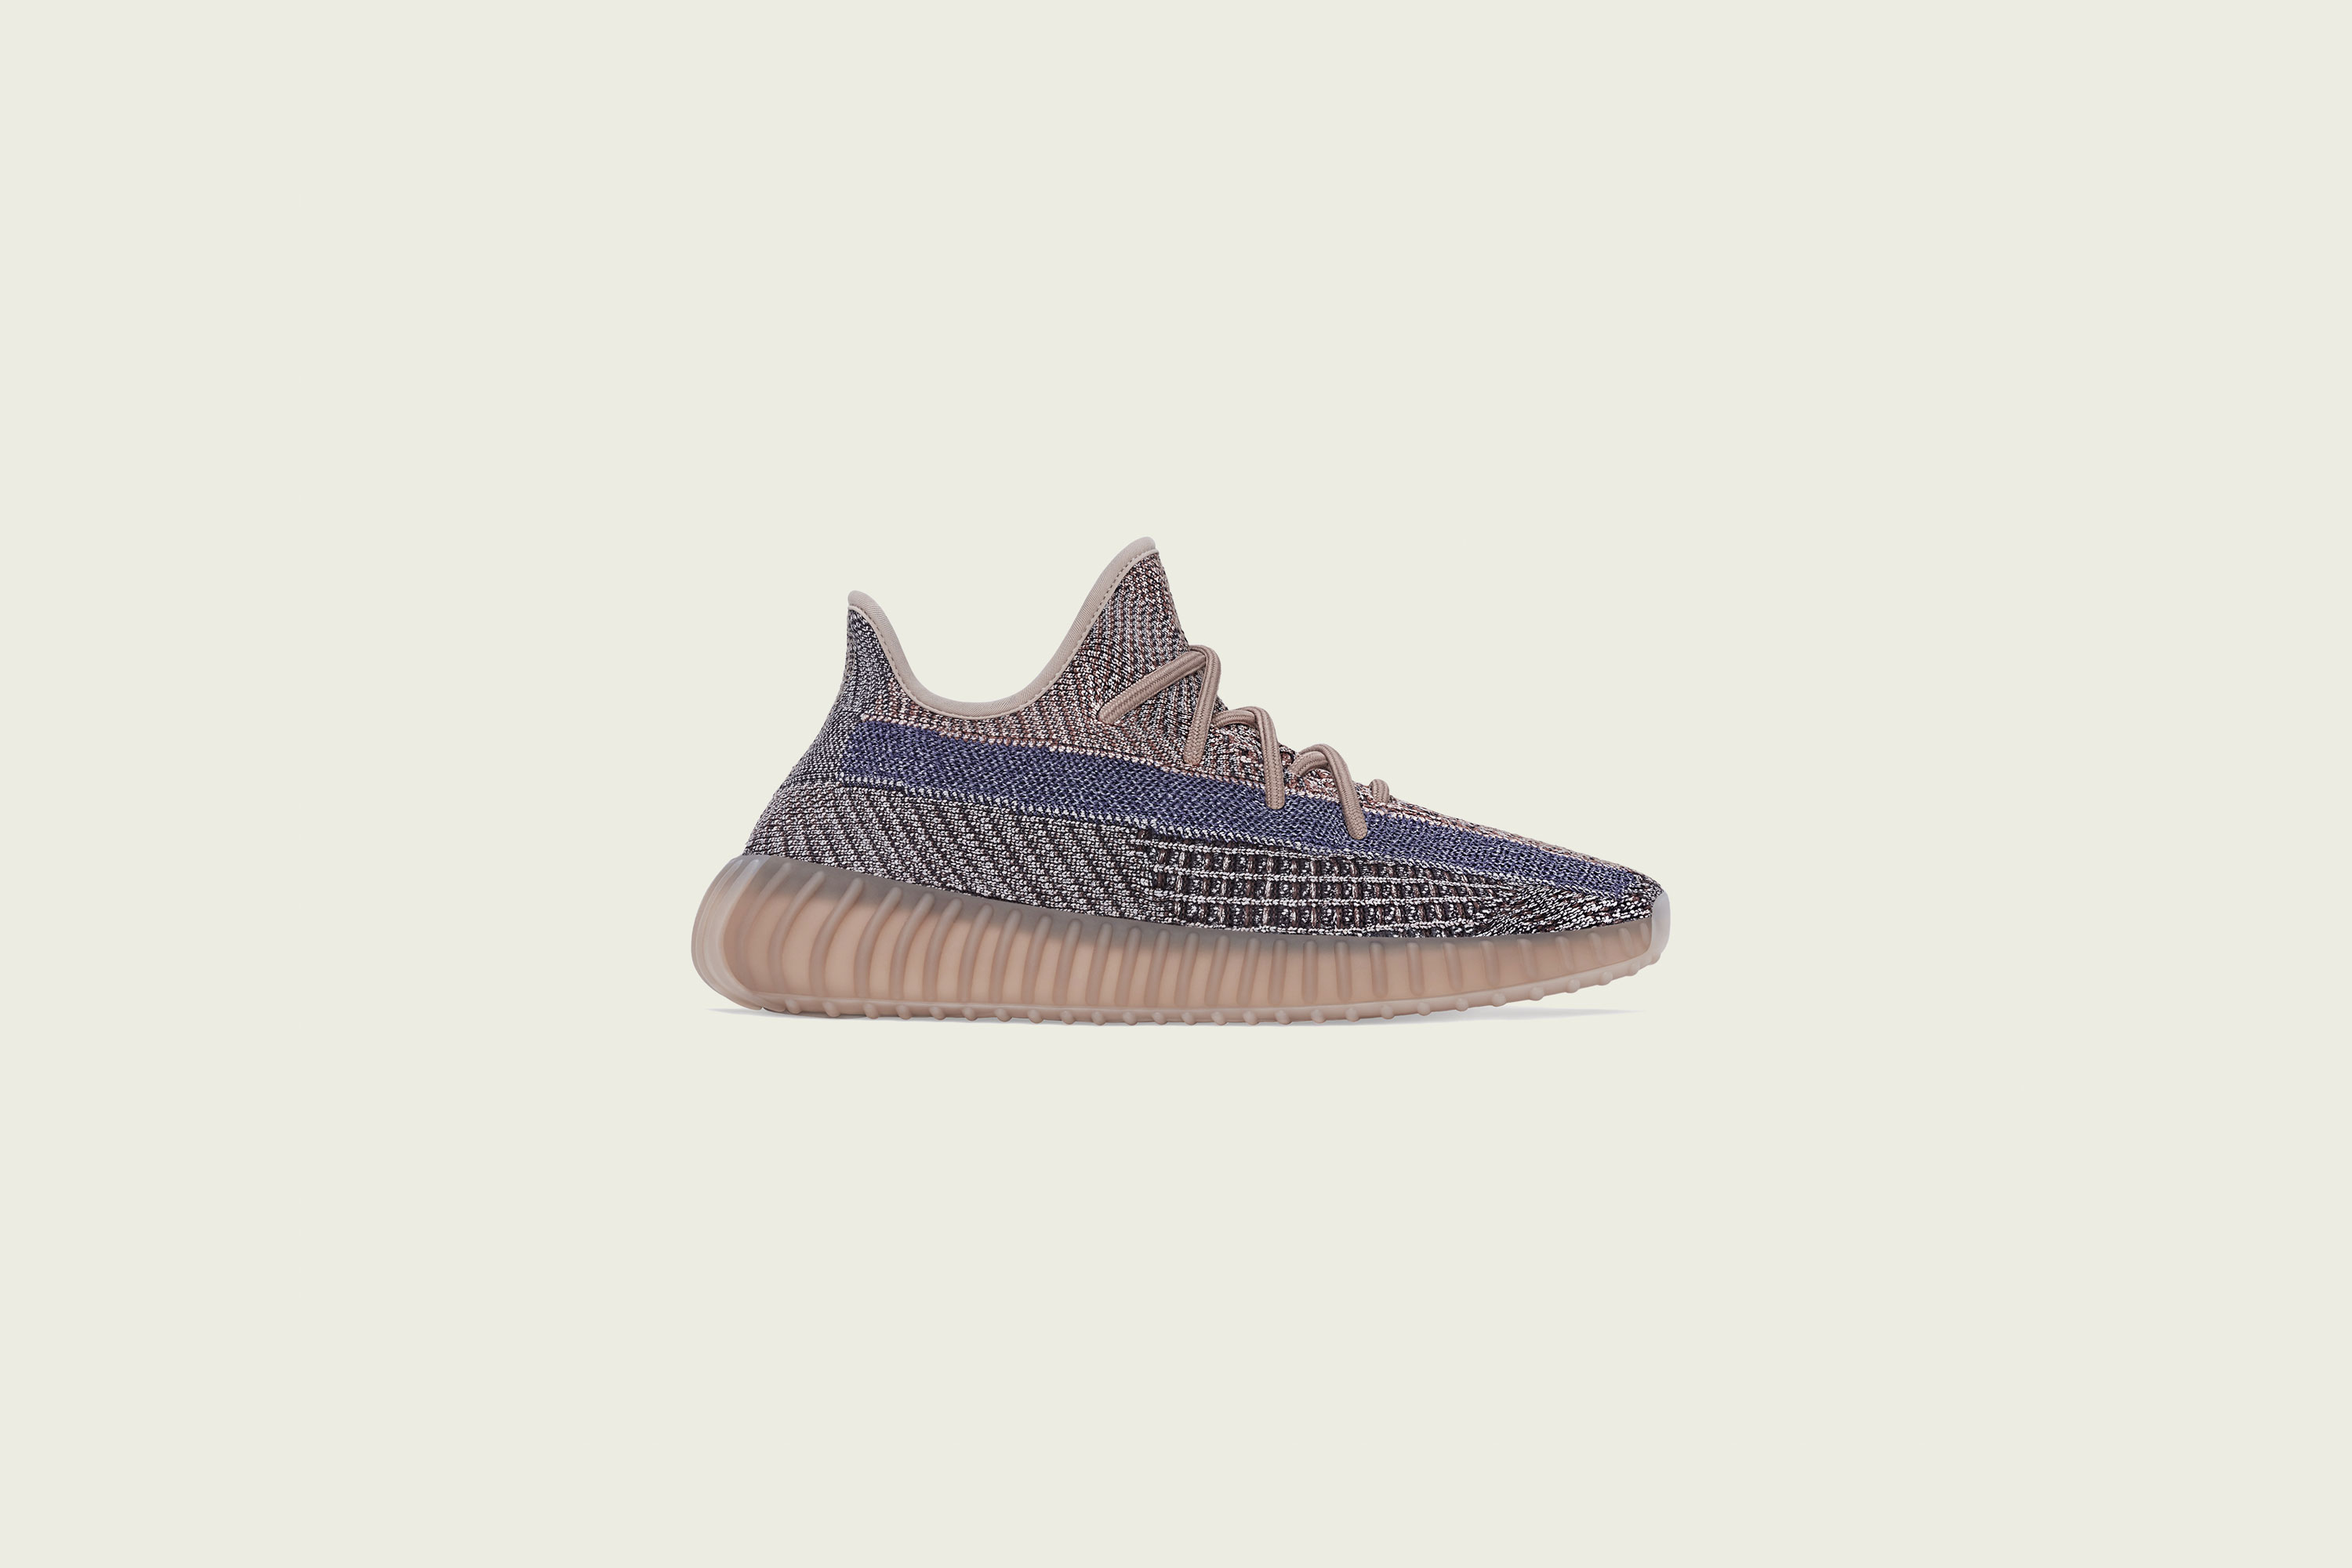 Yeezy - Yeezy Boost 350v2 - Fade - Up There